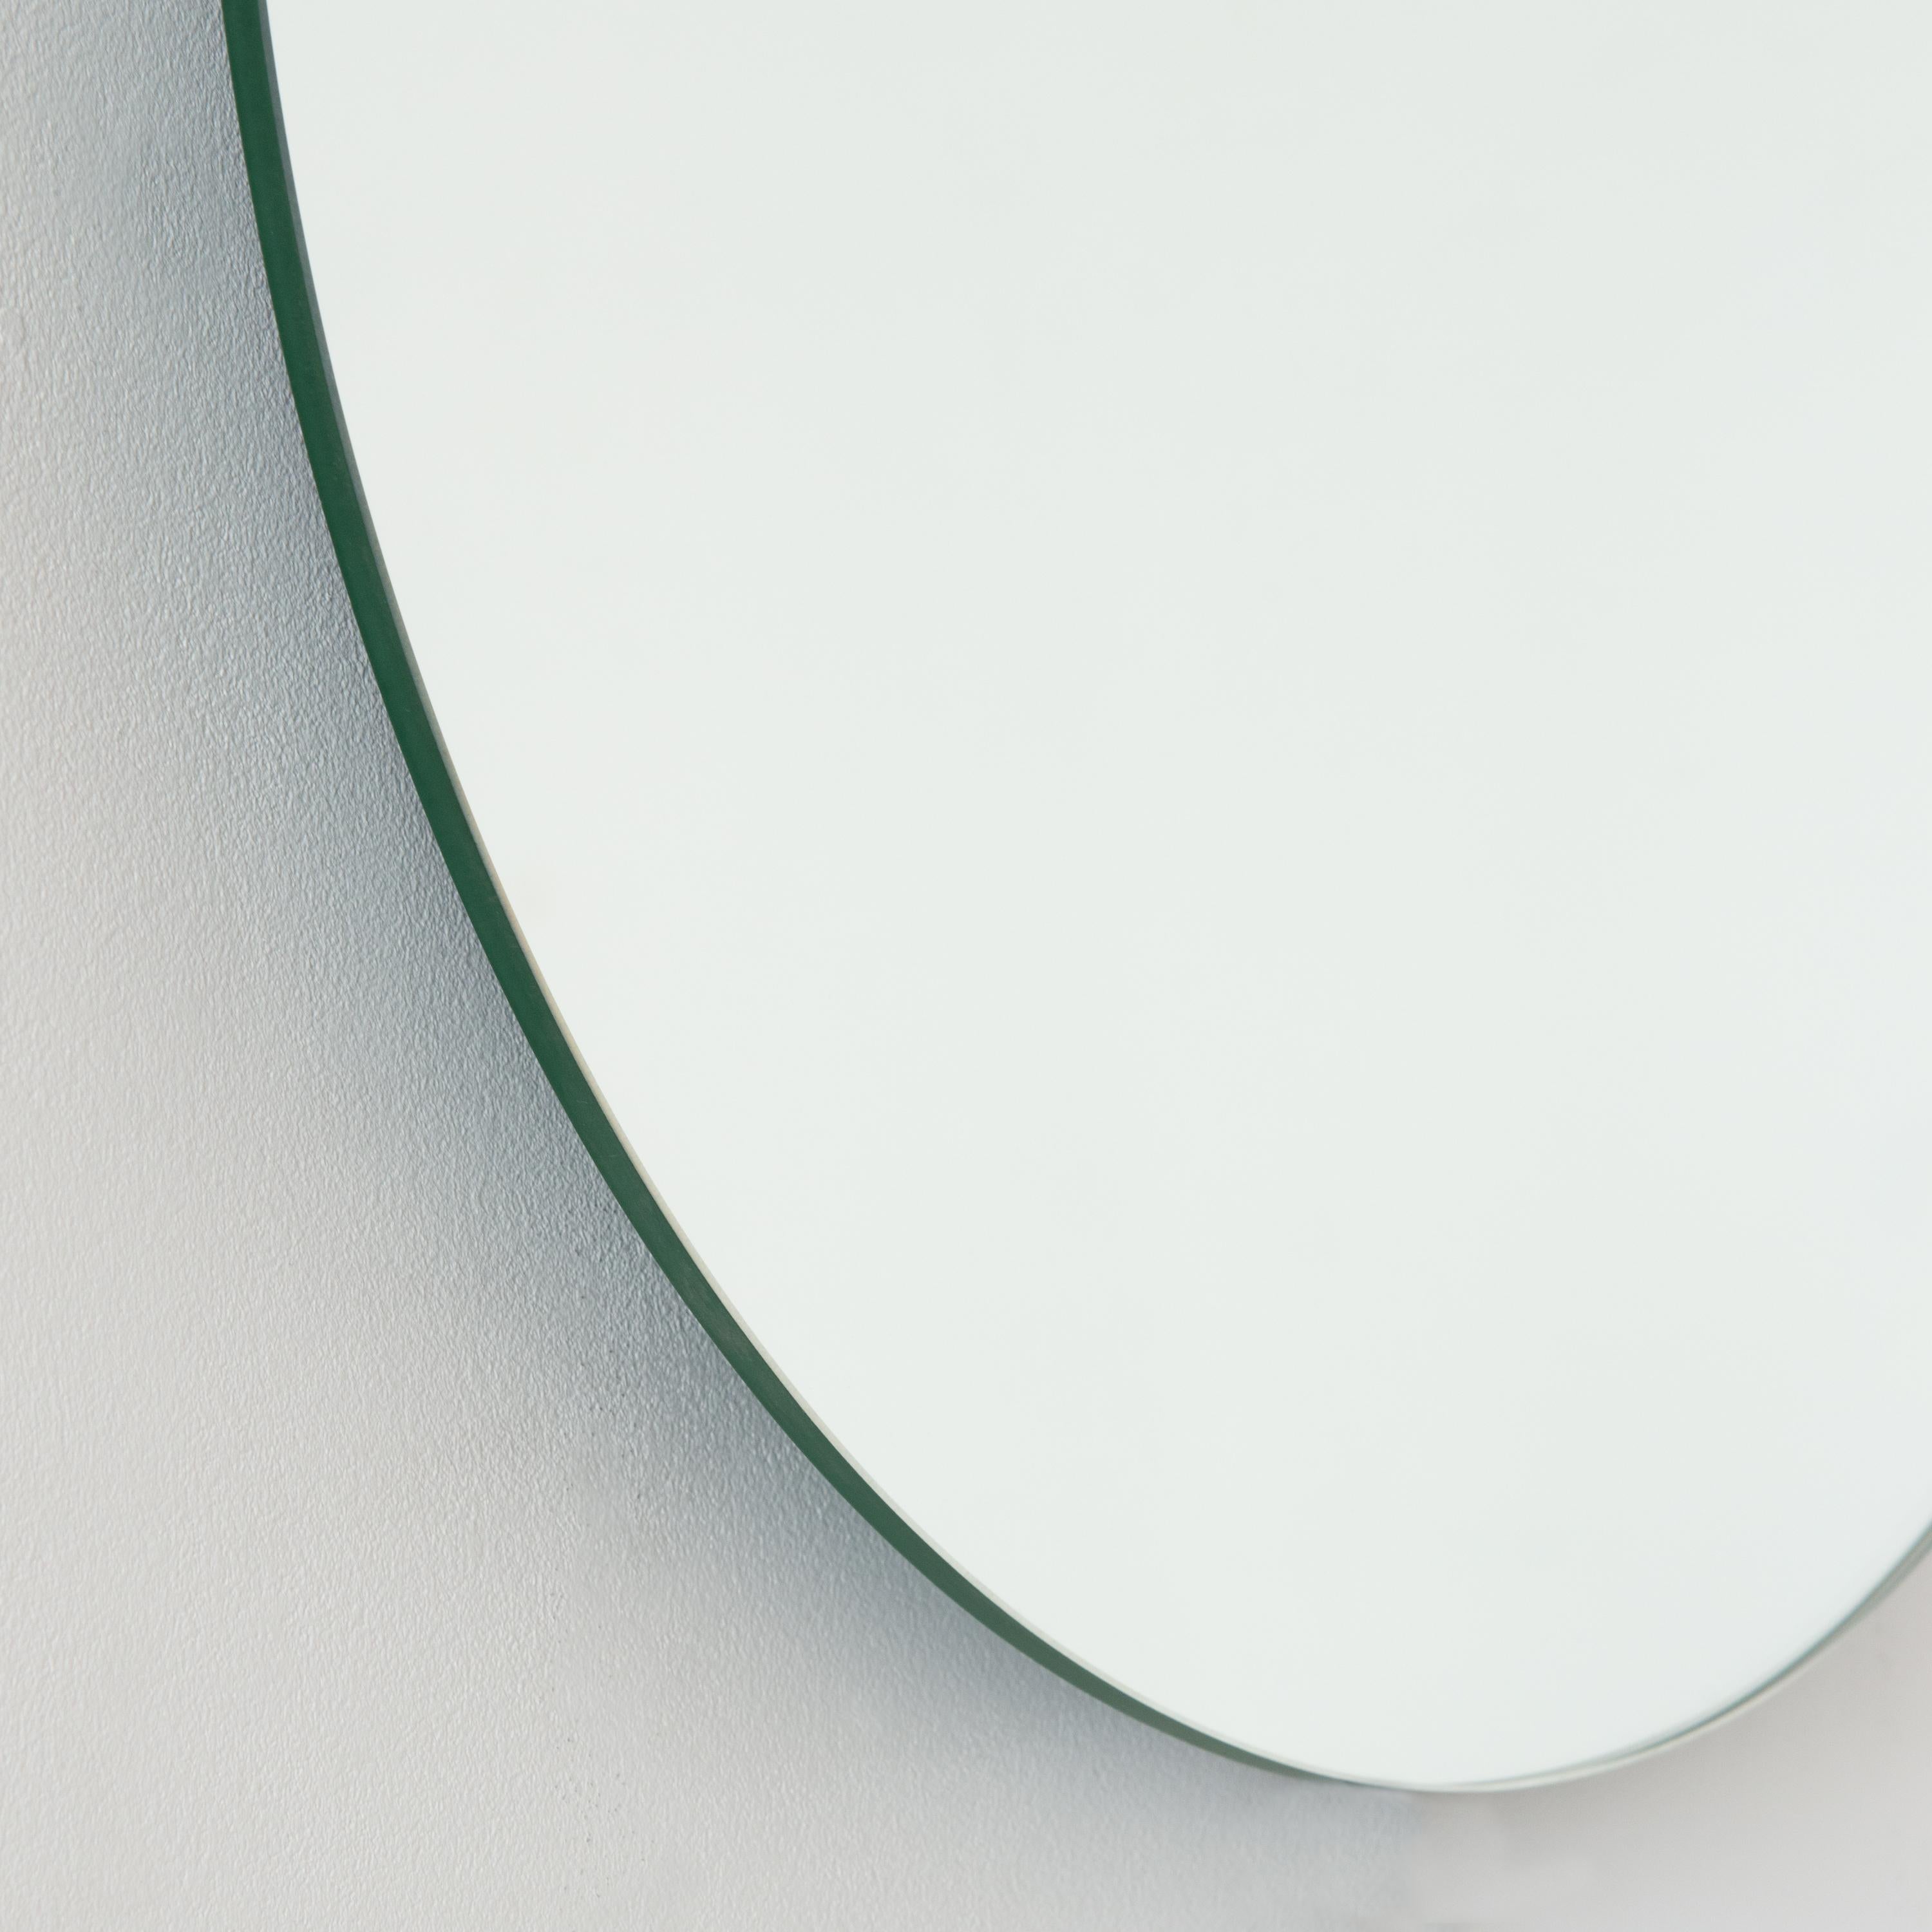 Orbis Round Minimalist Frameless Mirror Floating Effect, Small In New Condition For Sale In London, GB